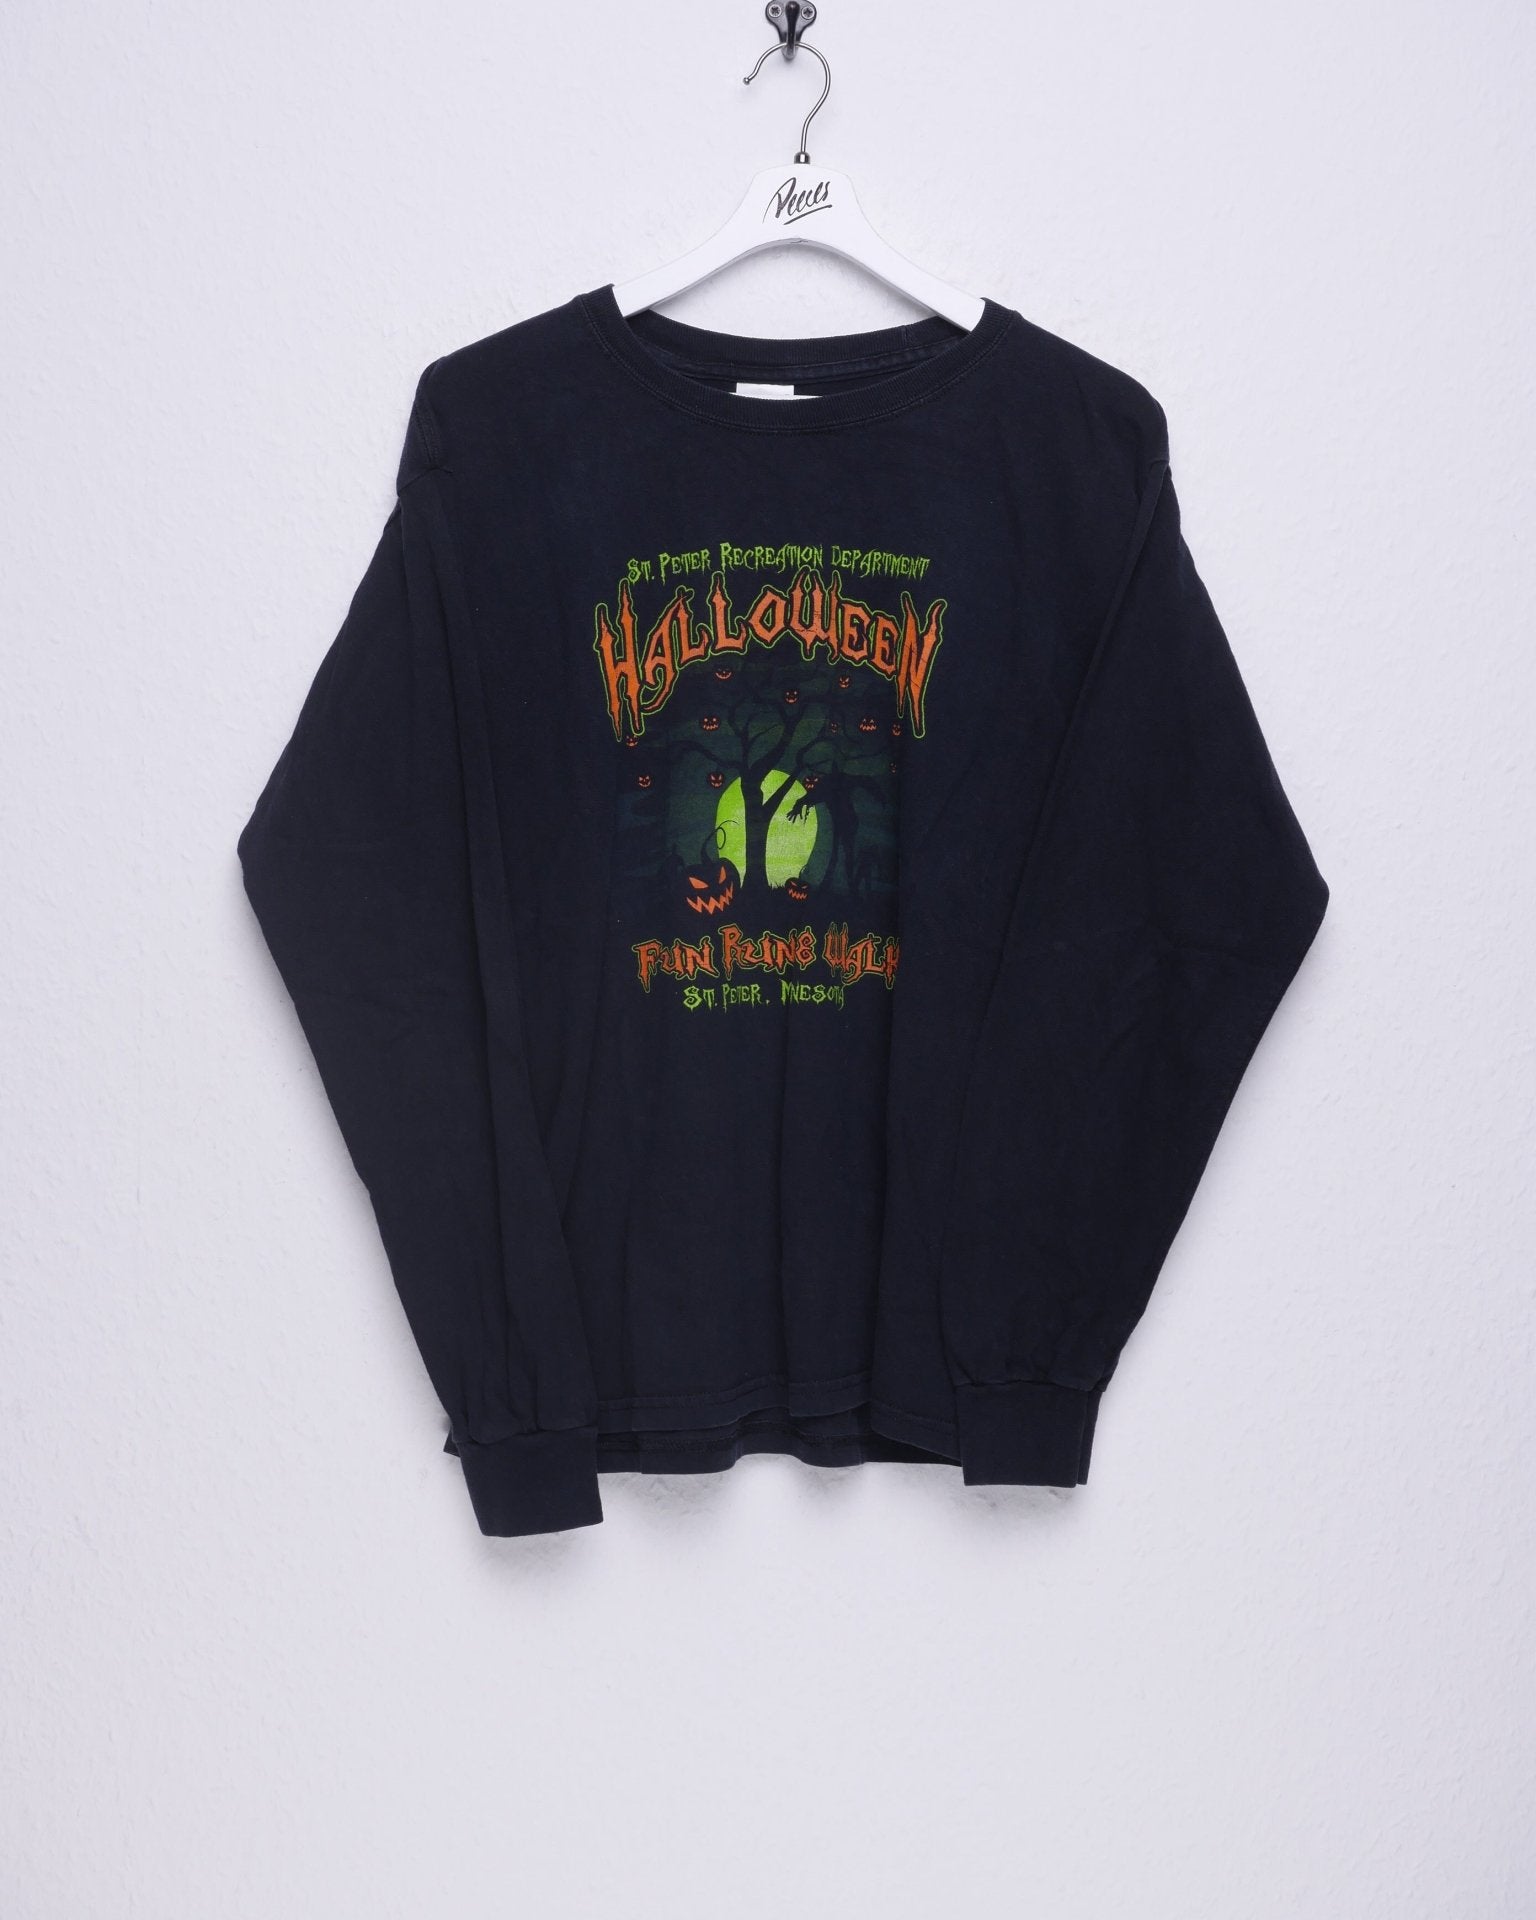 printed Halloween Graphic washed black L/S Shirt - Peeces